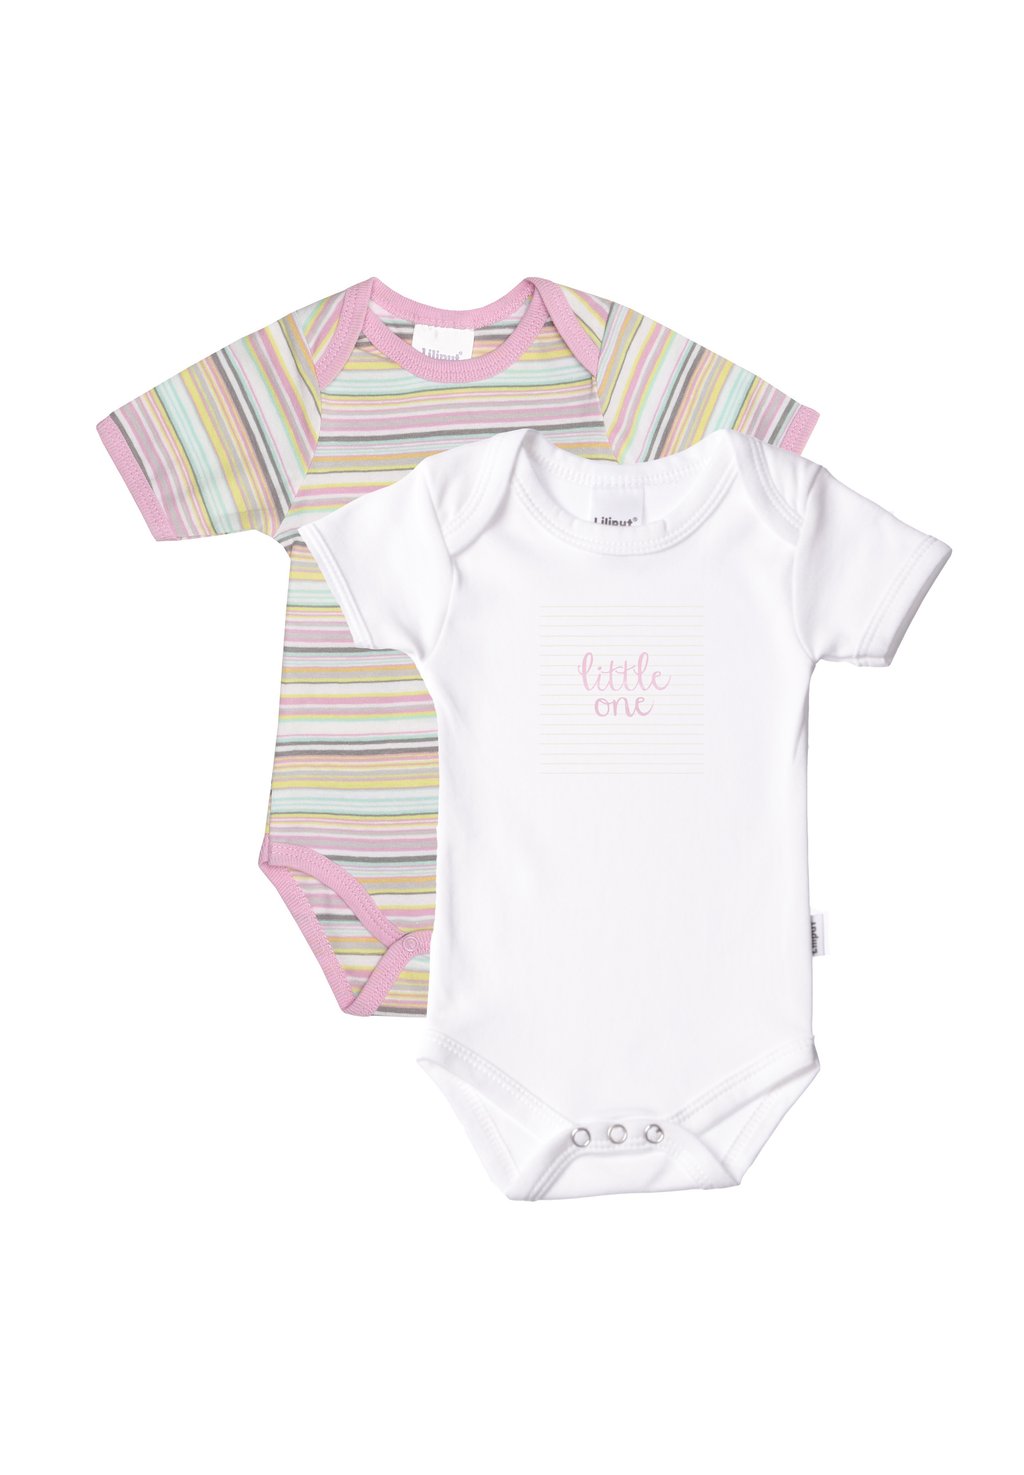 Боди 2PACK Liliput, цвет pink ringed / white with front print